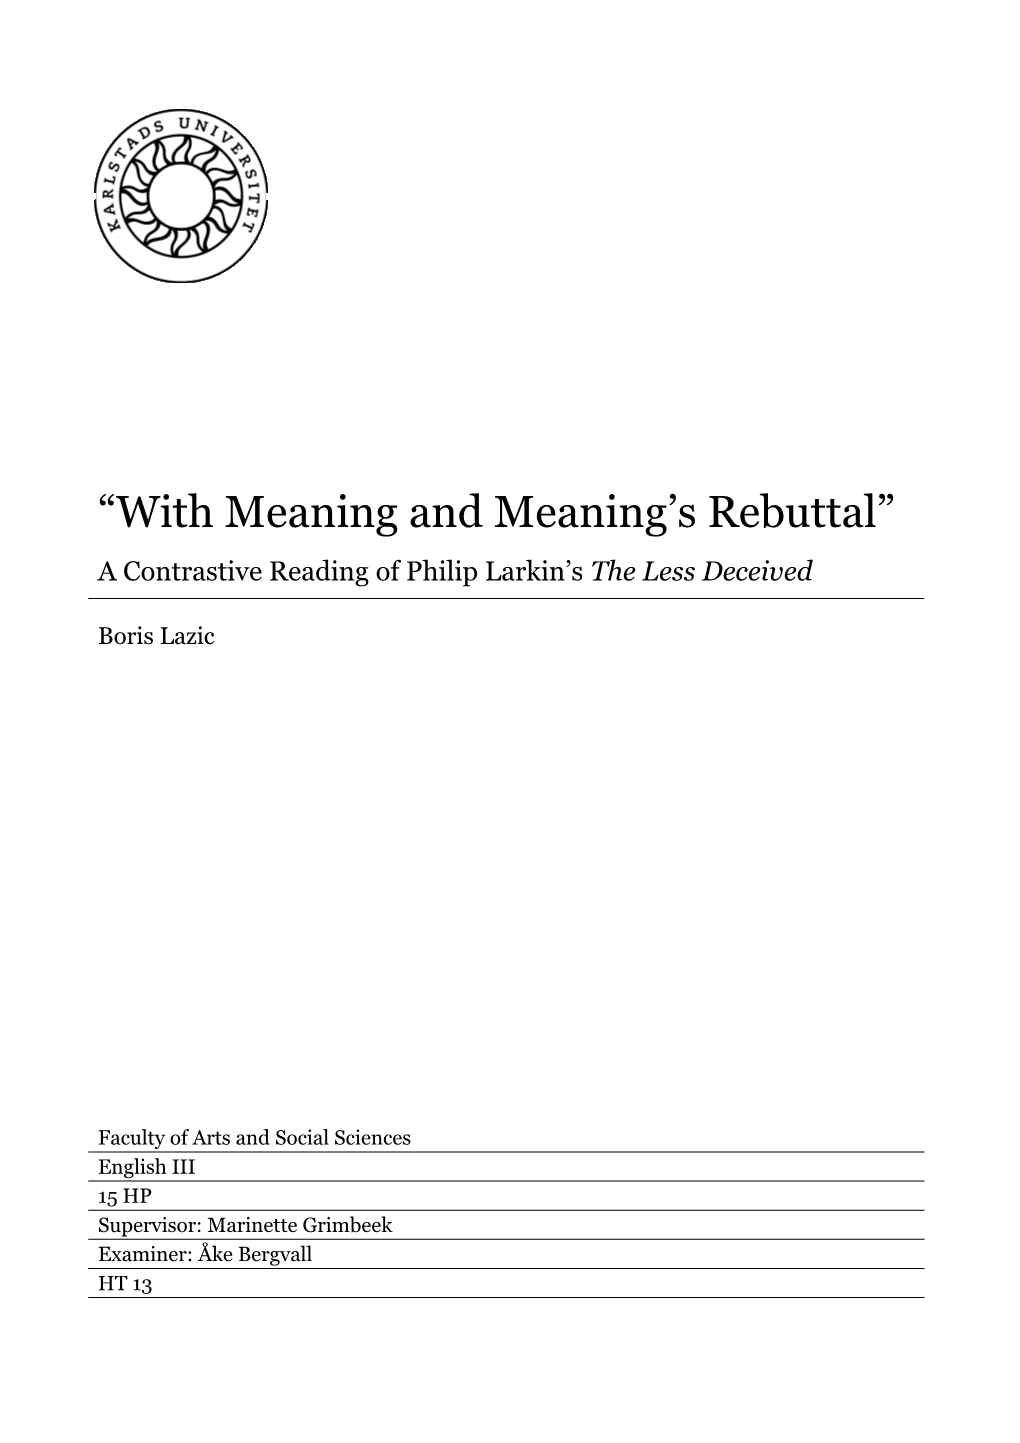 “With Meaning and Meaning's Rebuttal”